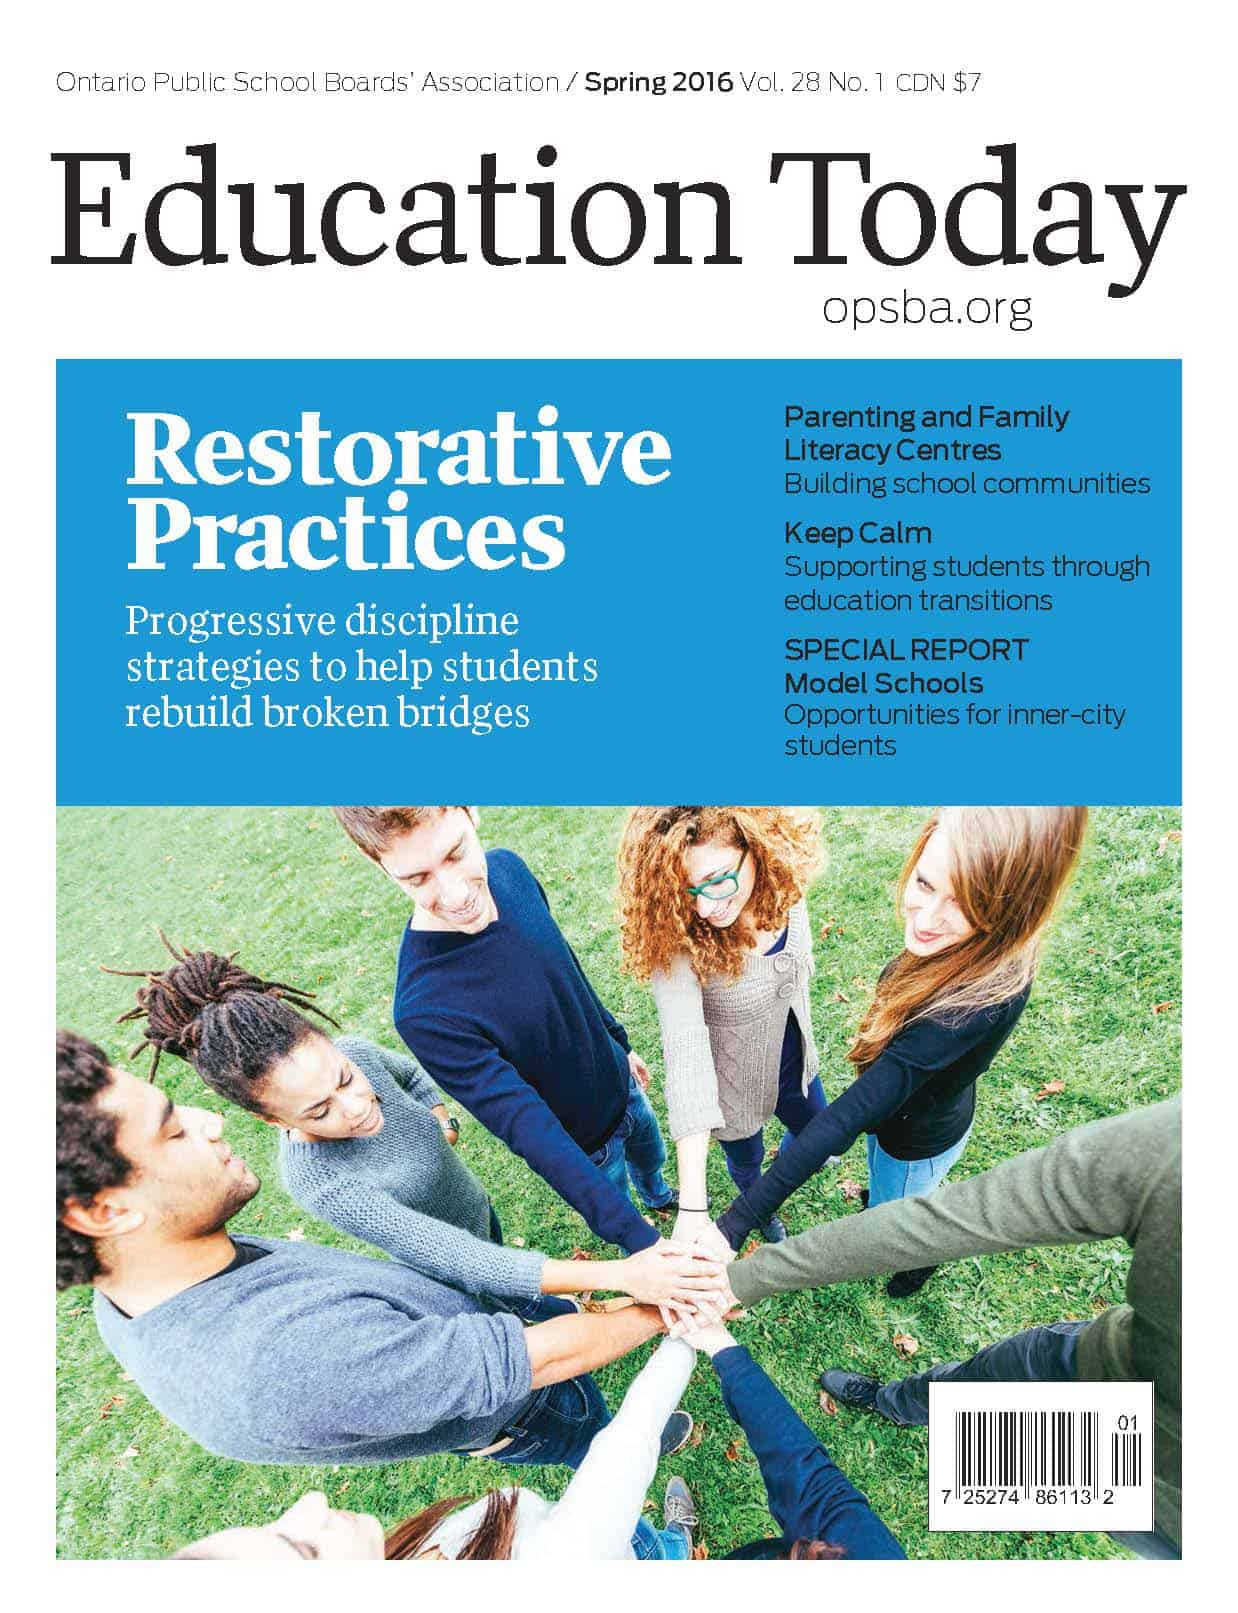 Education Today | Spring 2016 | Volume 28 Number 1